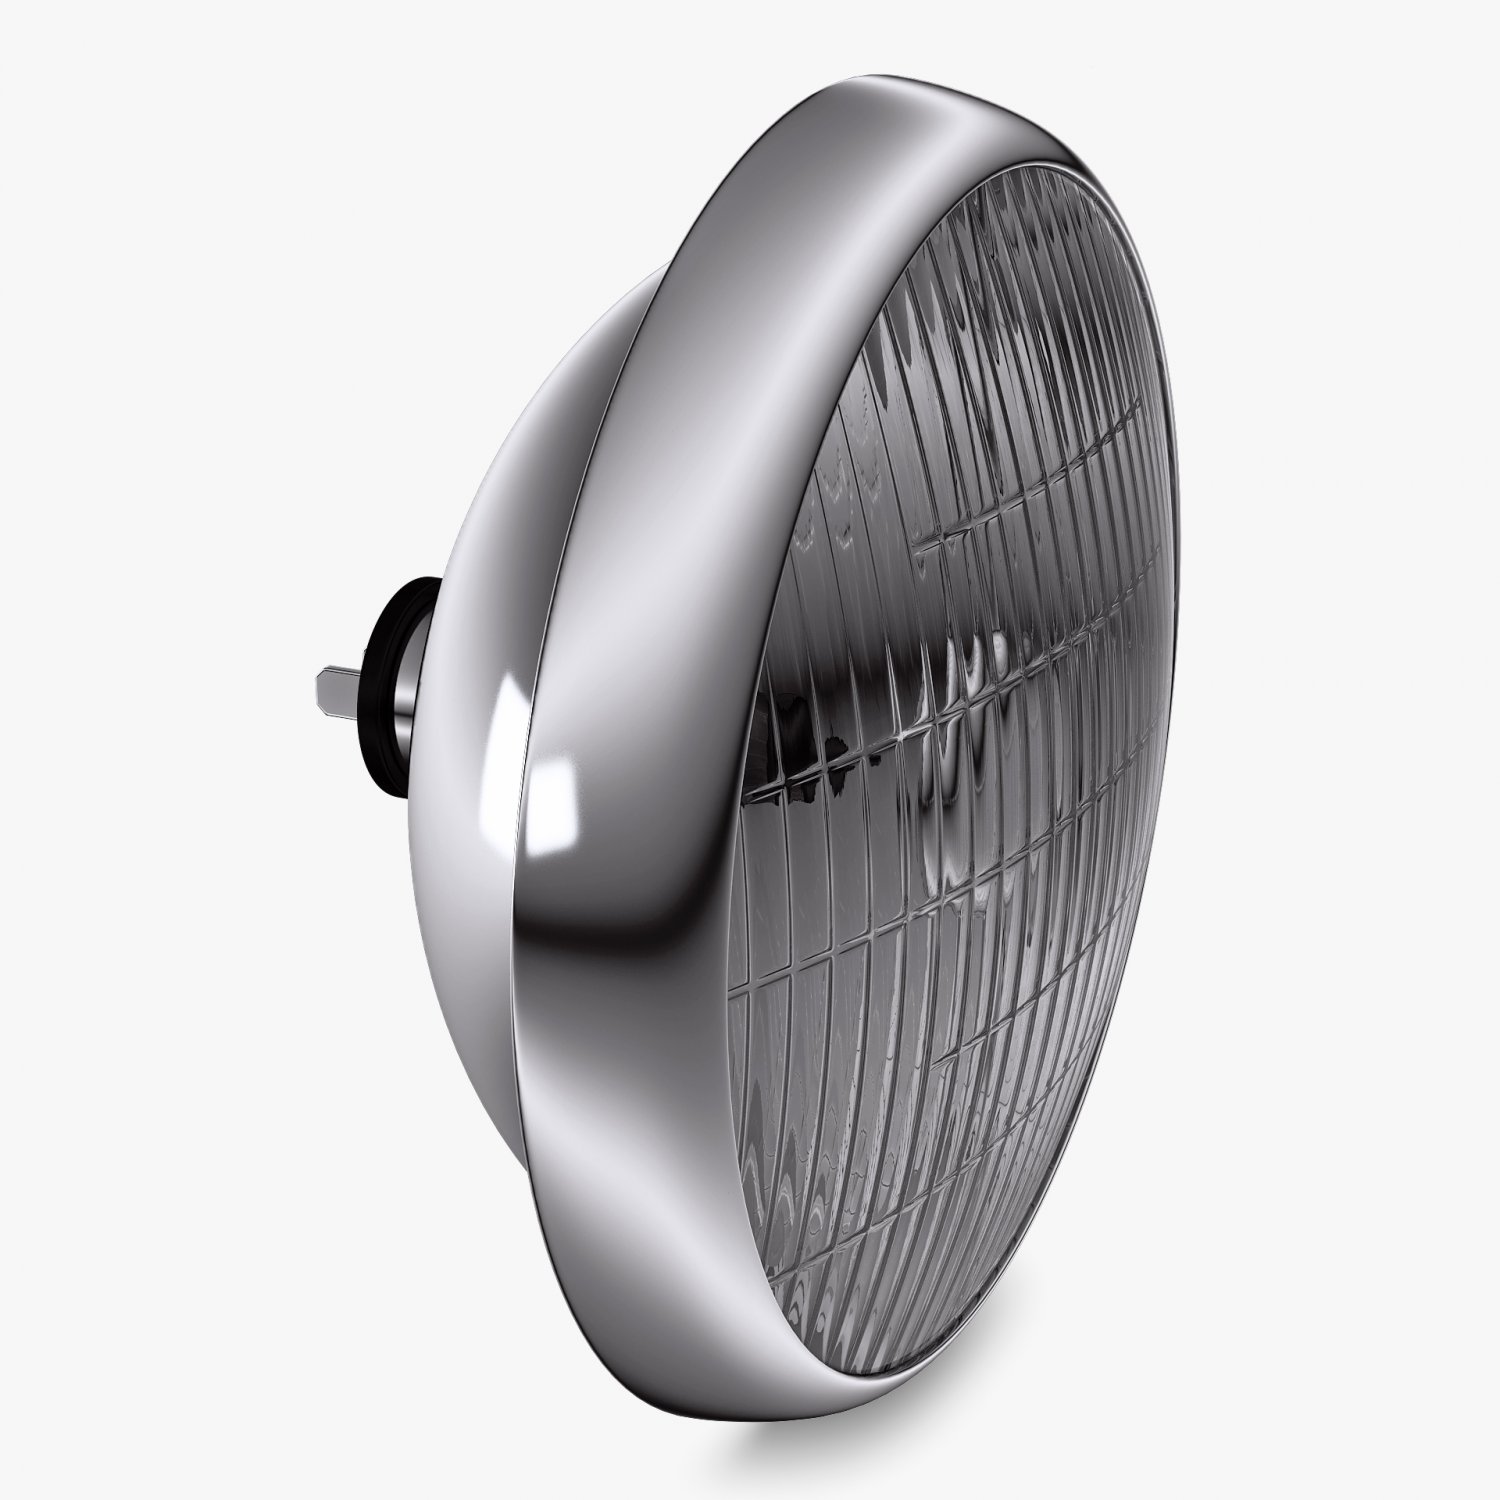 Round headlight - Download Free 3D model by AnellaVisuals